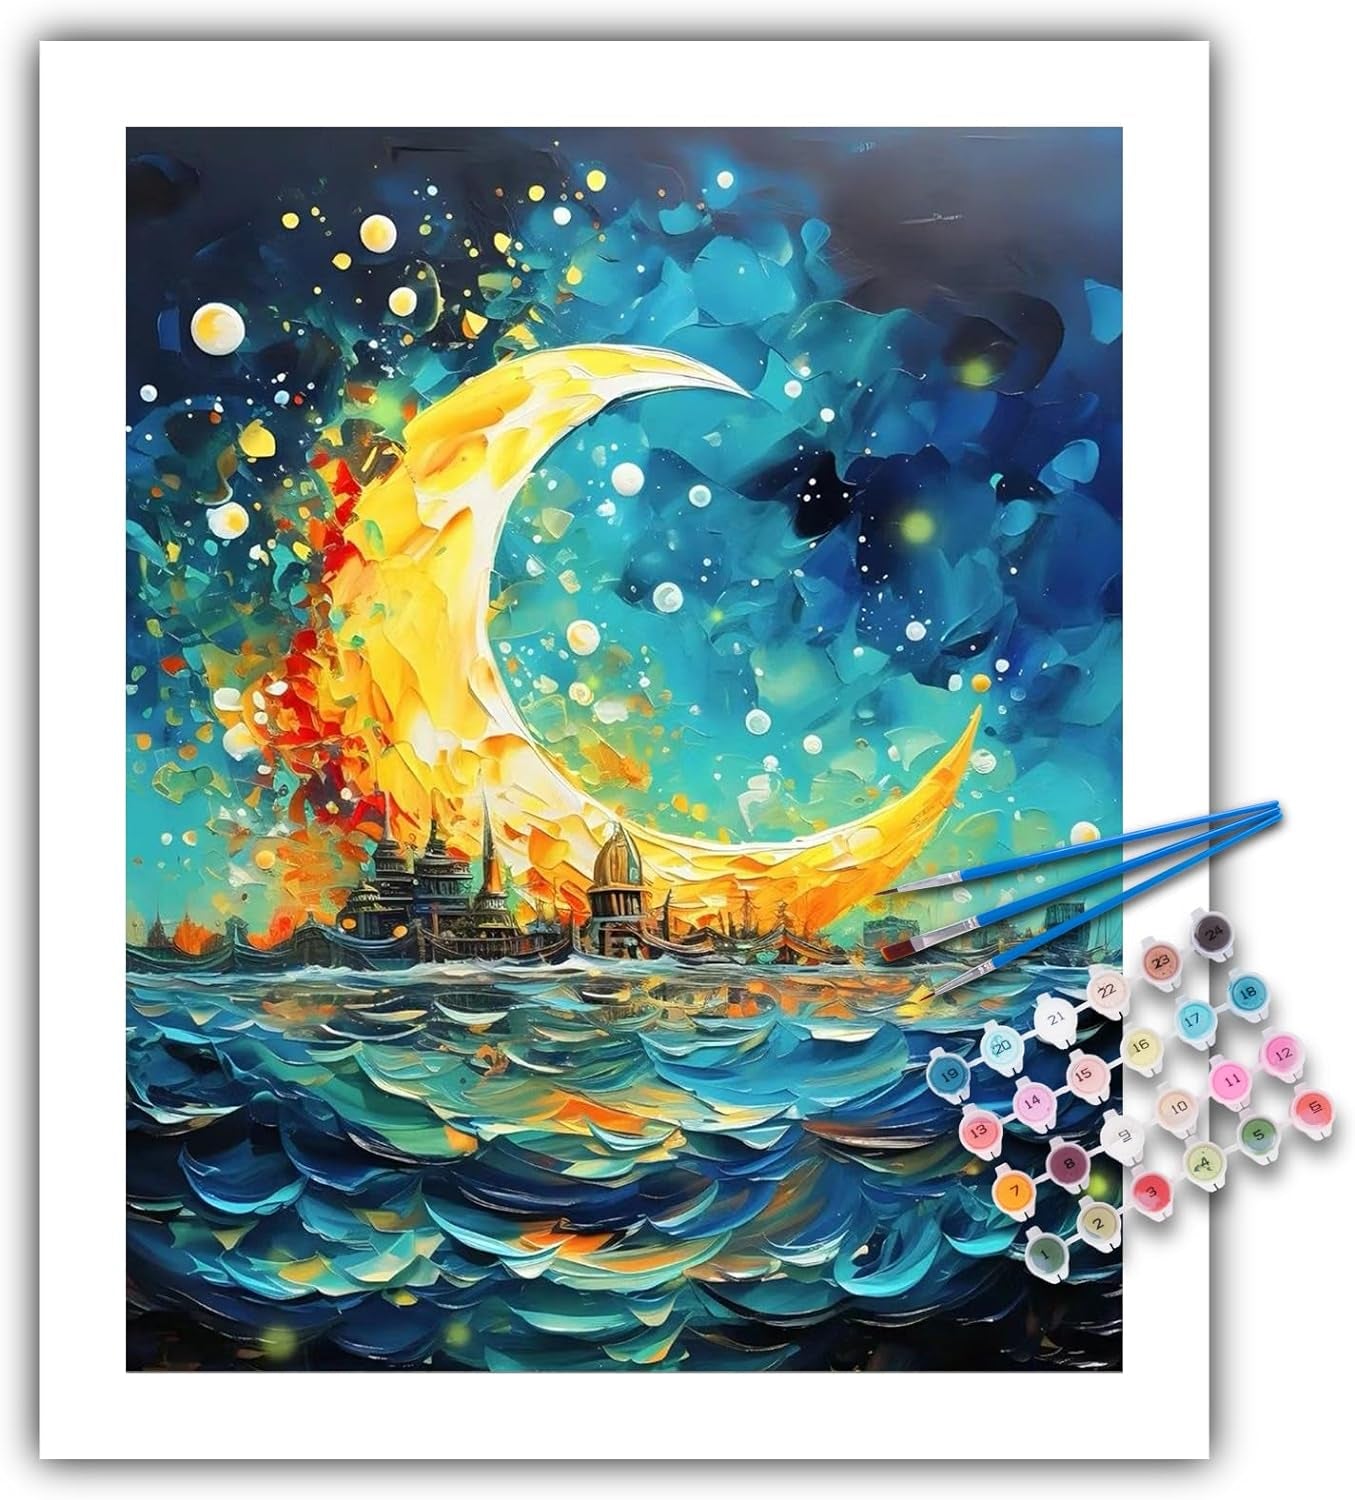 Paint by Numbers Kit for Adults Beginner, Seaside Acrylic Adult Paint by Number Kits on Canvas, Seascapewatercolor Oil Paint by Number for Adults, Perfect for Home Decor Gift 16"X20"